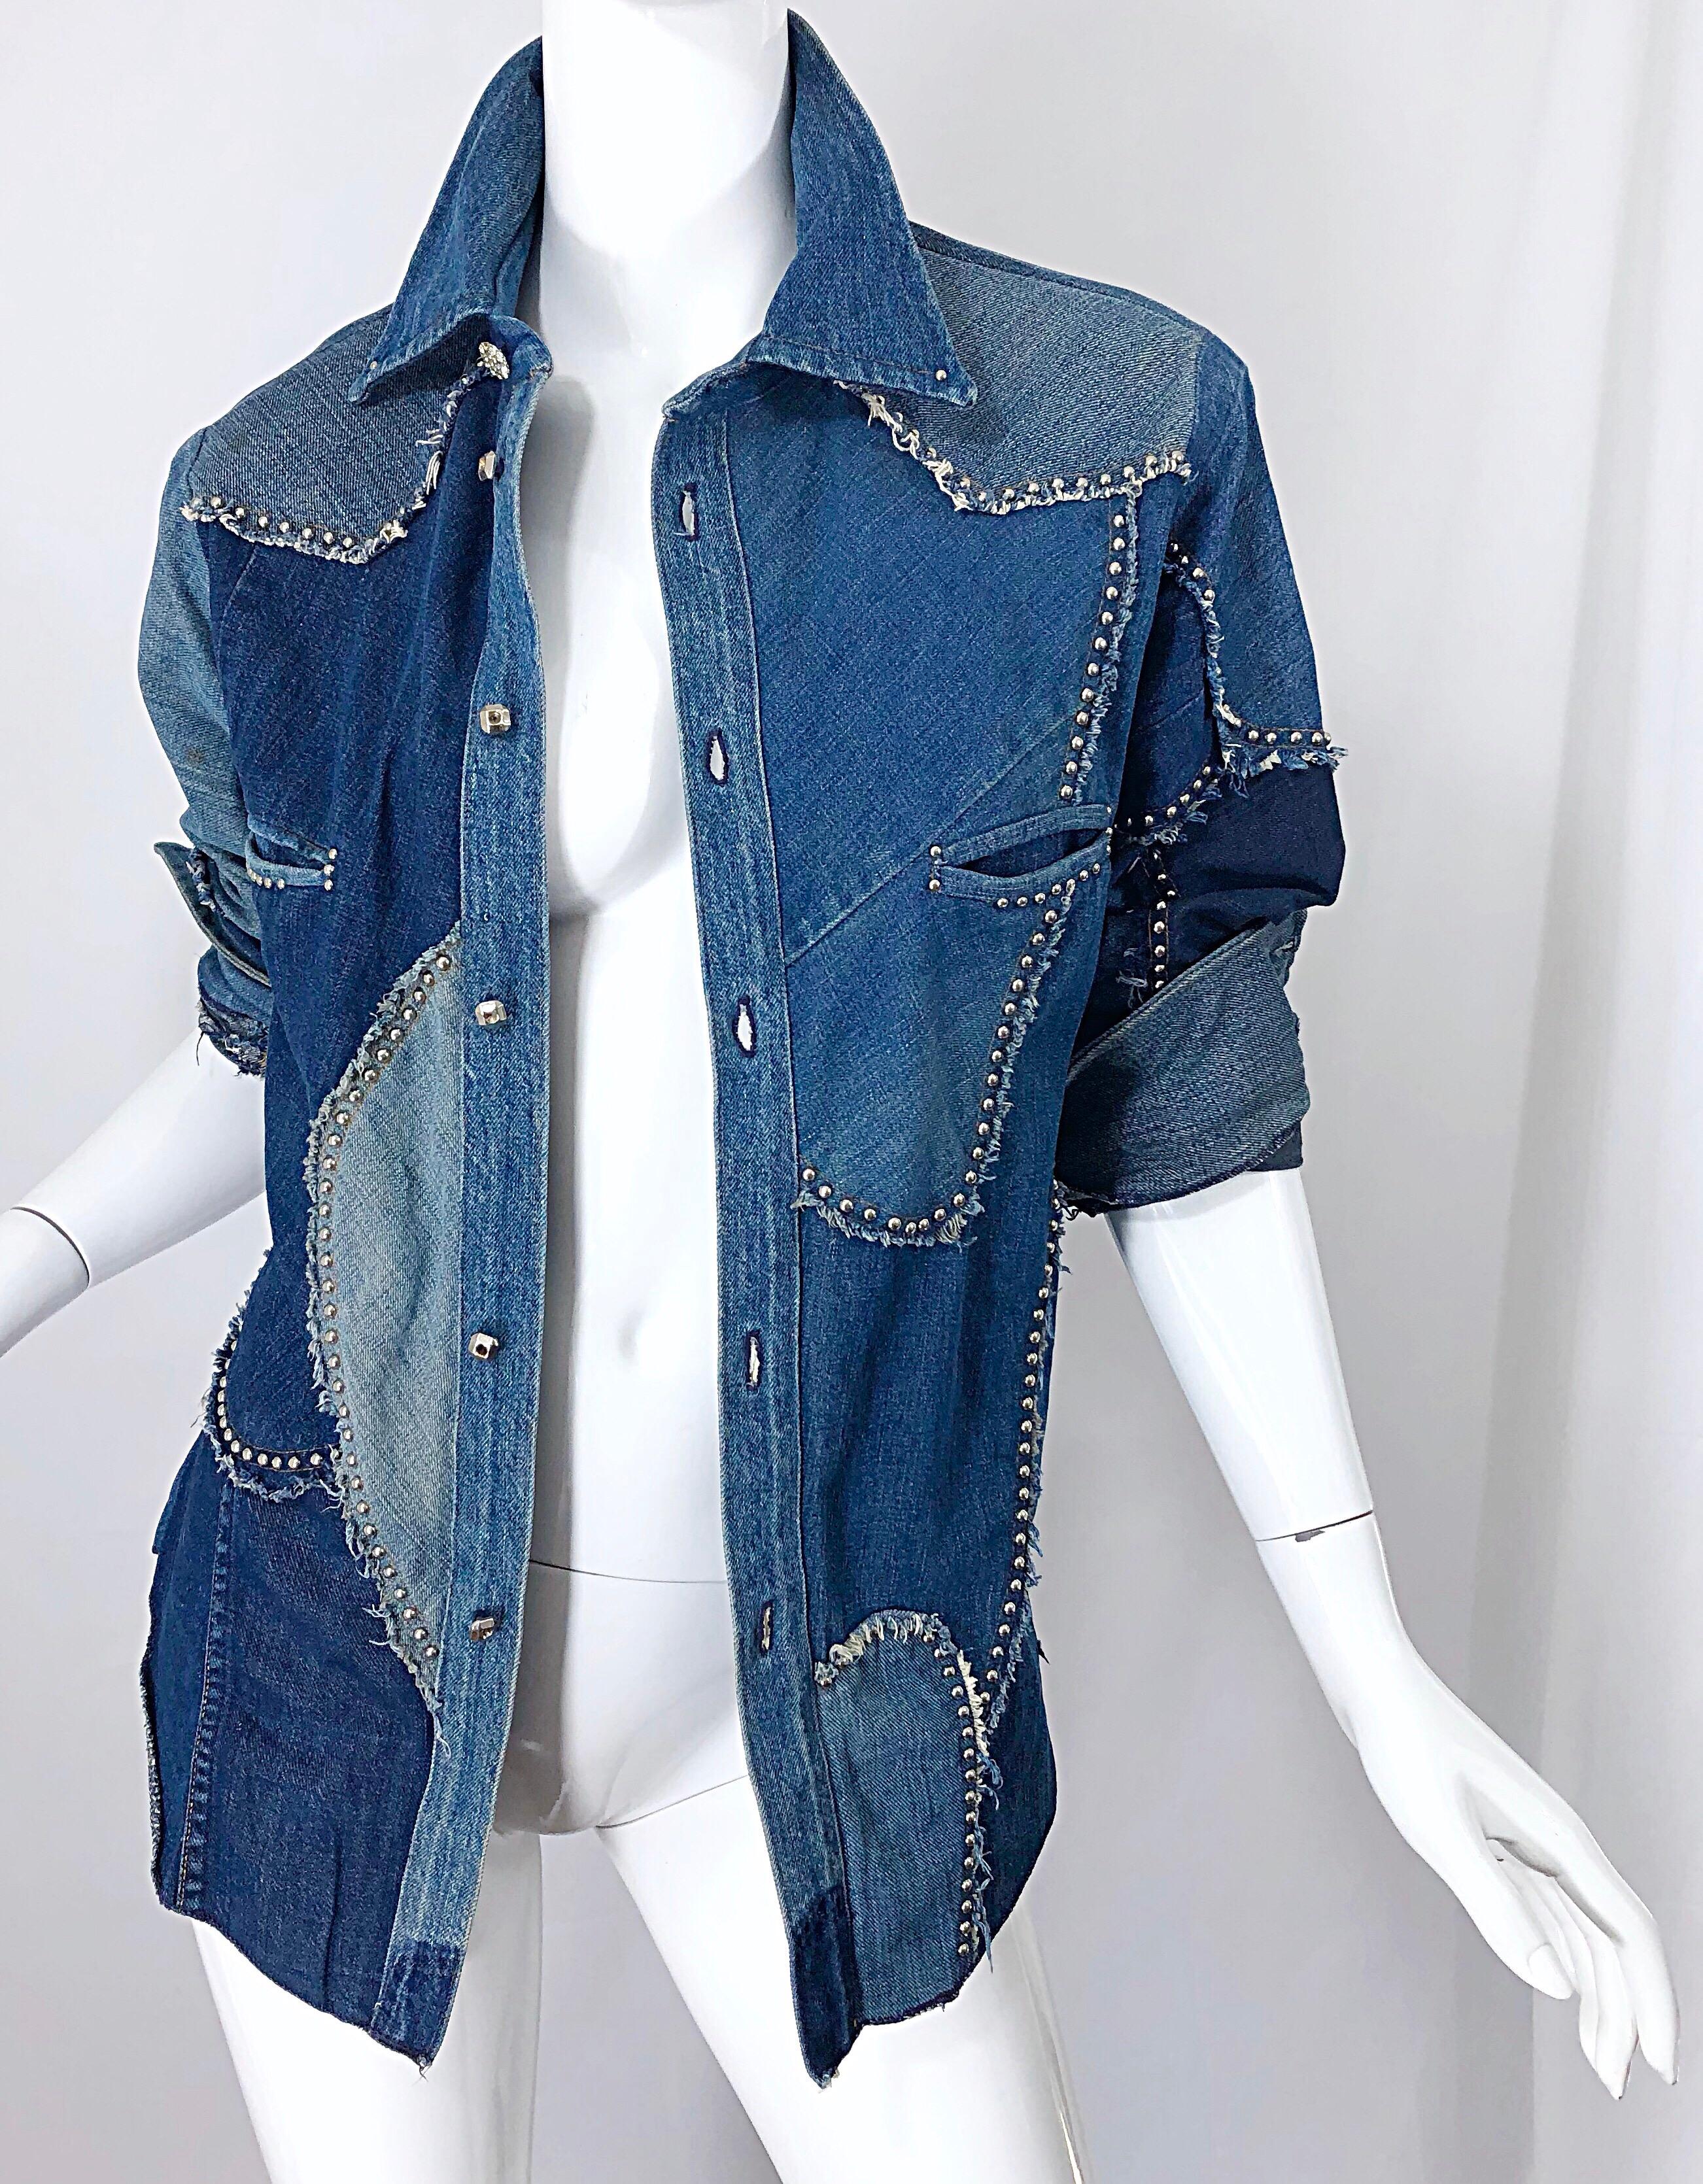 Rare 1970s Love, Melody Sabatasso Unisex Denim Blue Jean Patchwork 70s Shirt In Excellent Condition For Sale In San Diego, CA